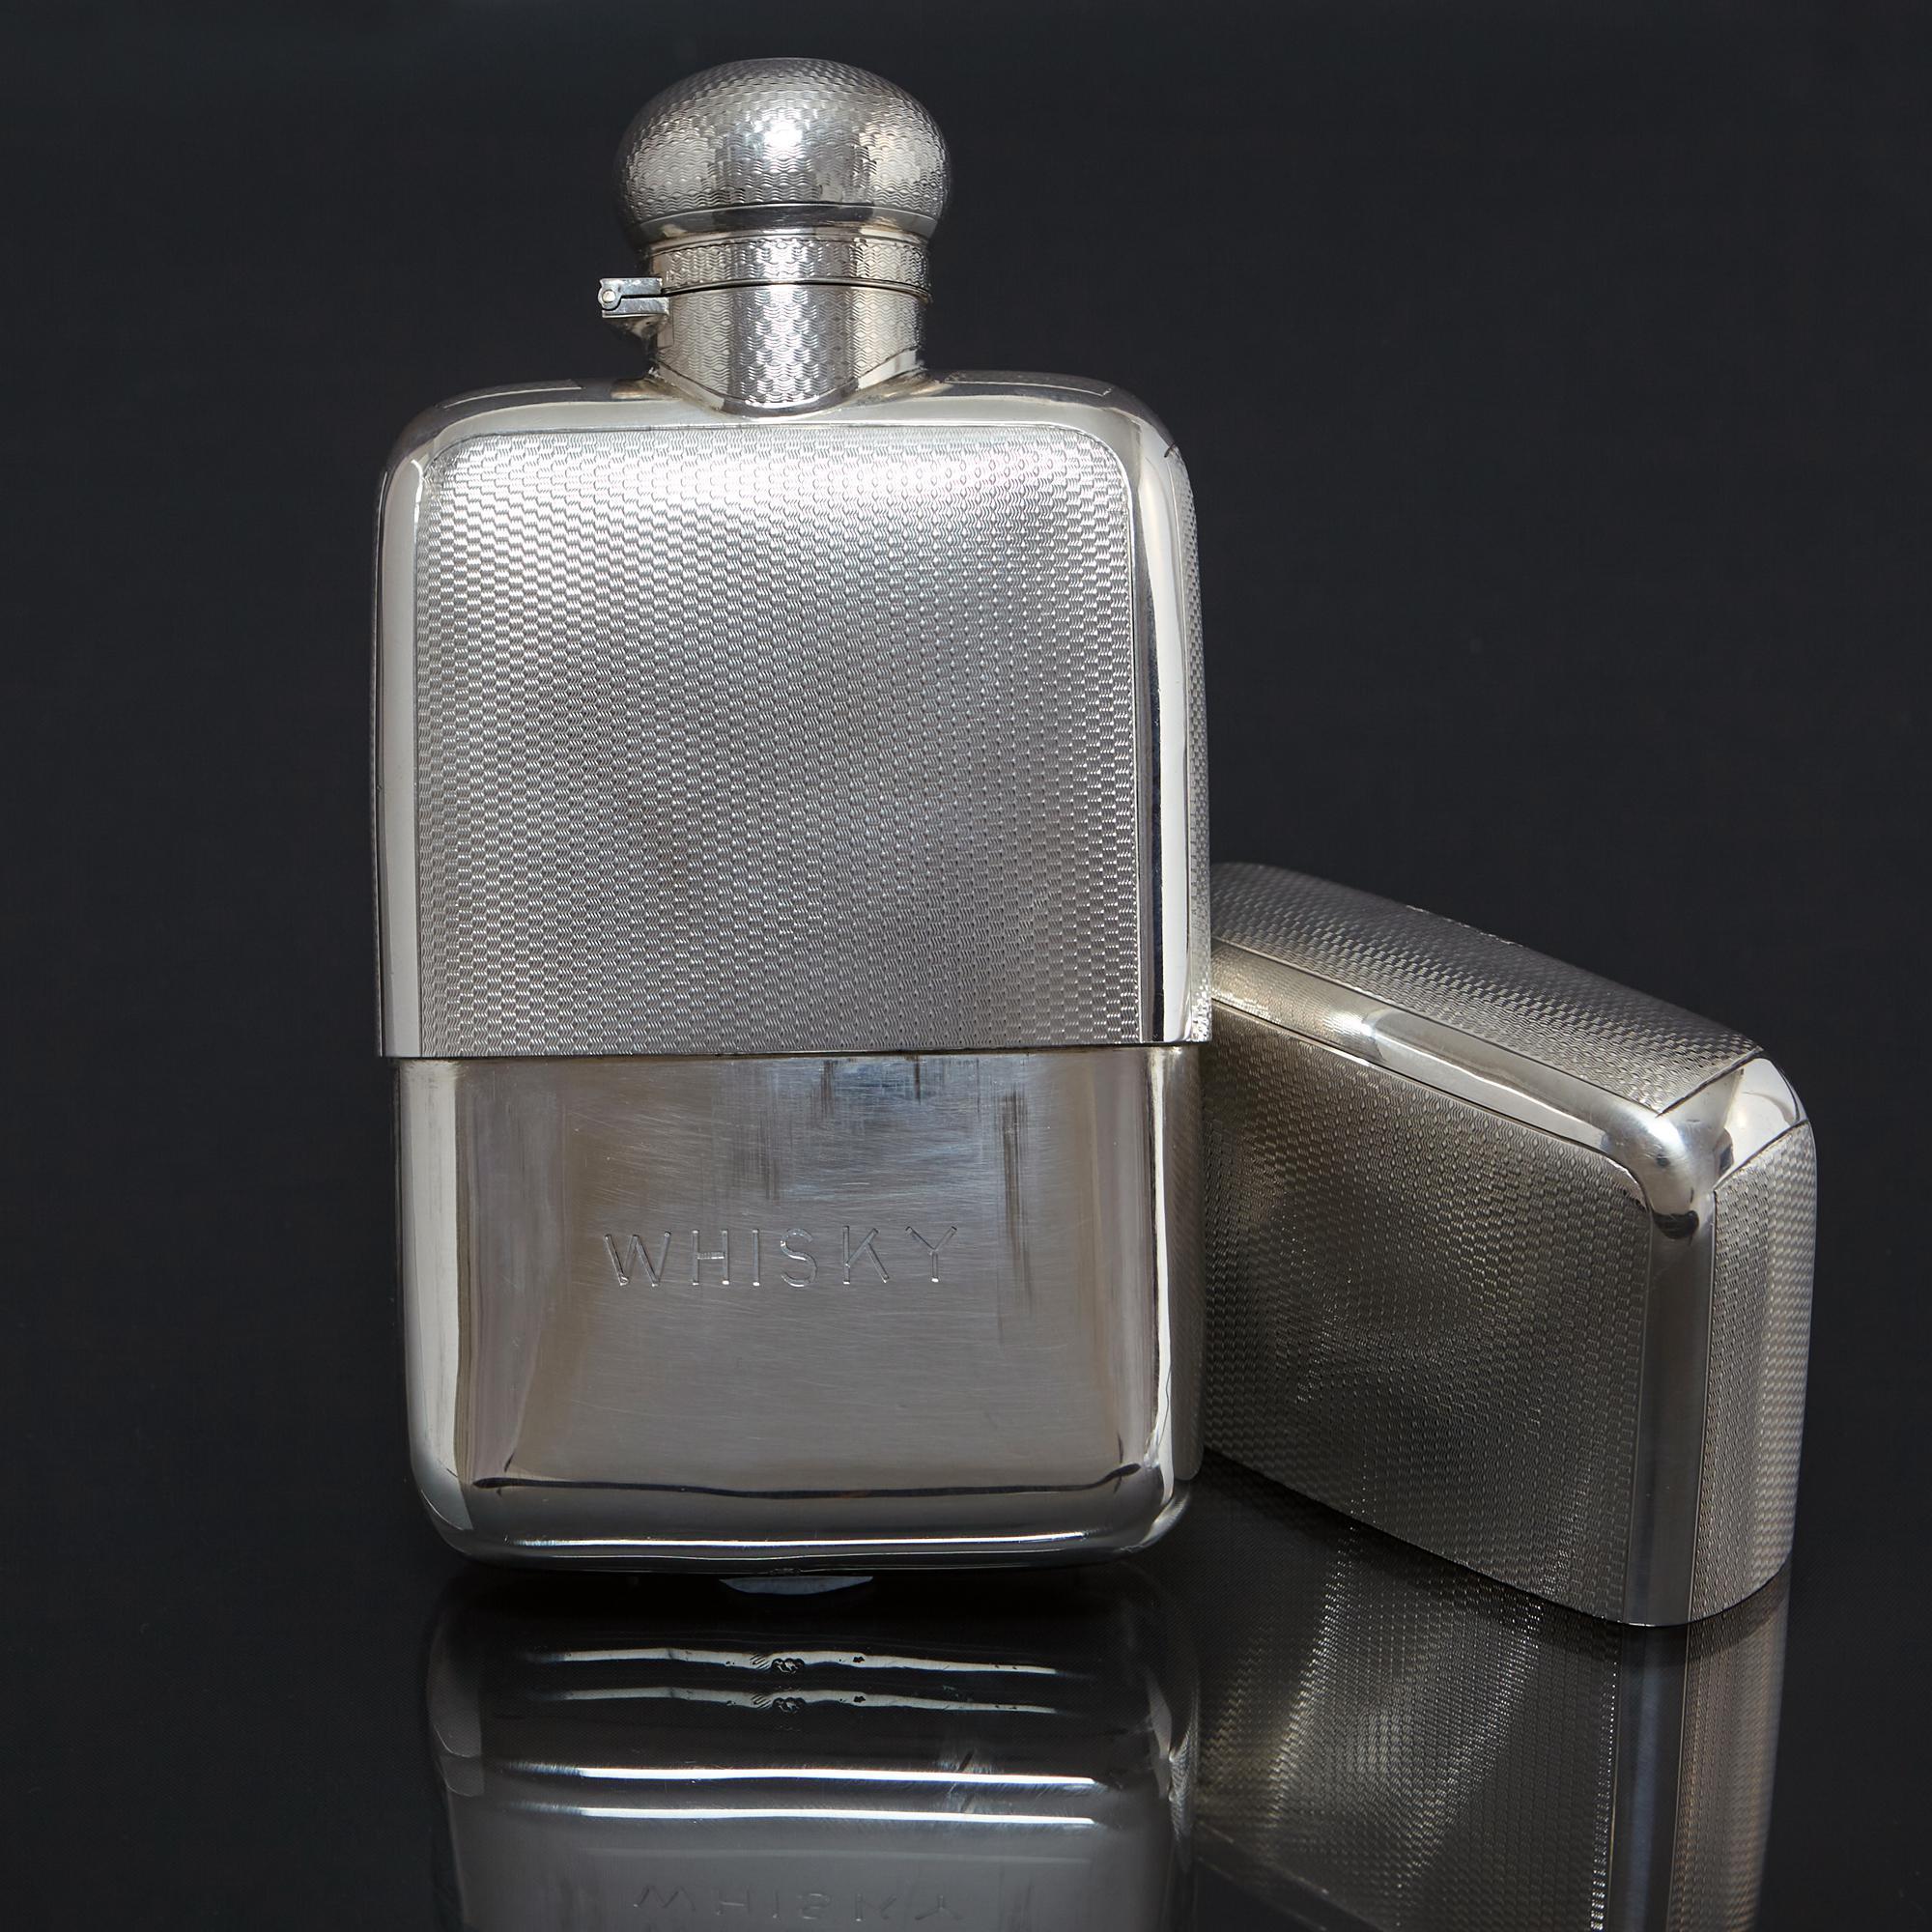 A large and exceptionally fine quality silver hipflask with slide-off cup and fitted with a one-twist, bayonet domed cover. All parts are beautifully decorated with classic engine-turned engraving with the plain body inside the cup engraved with the